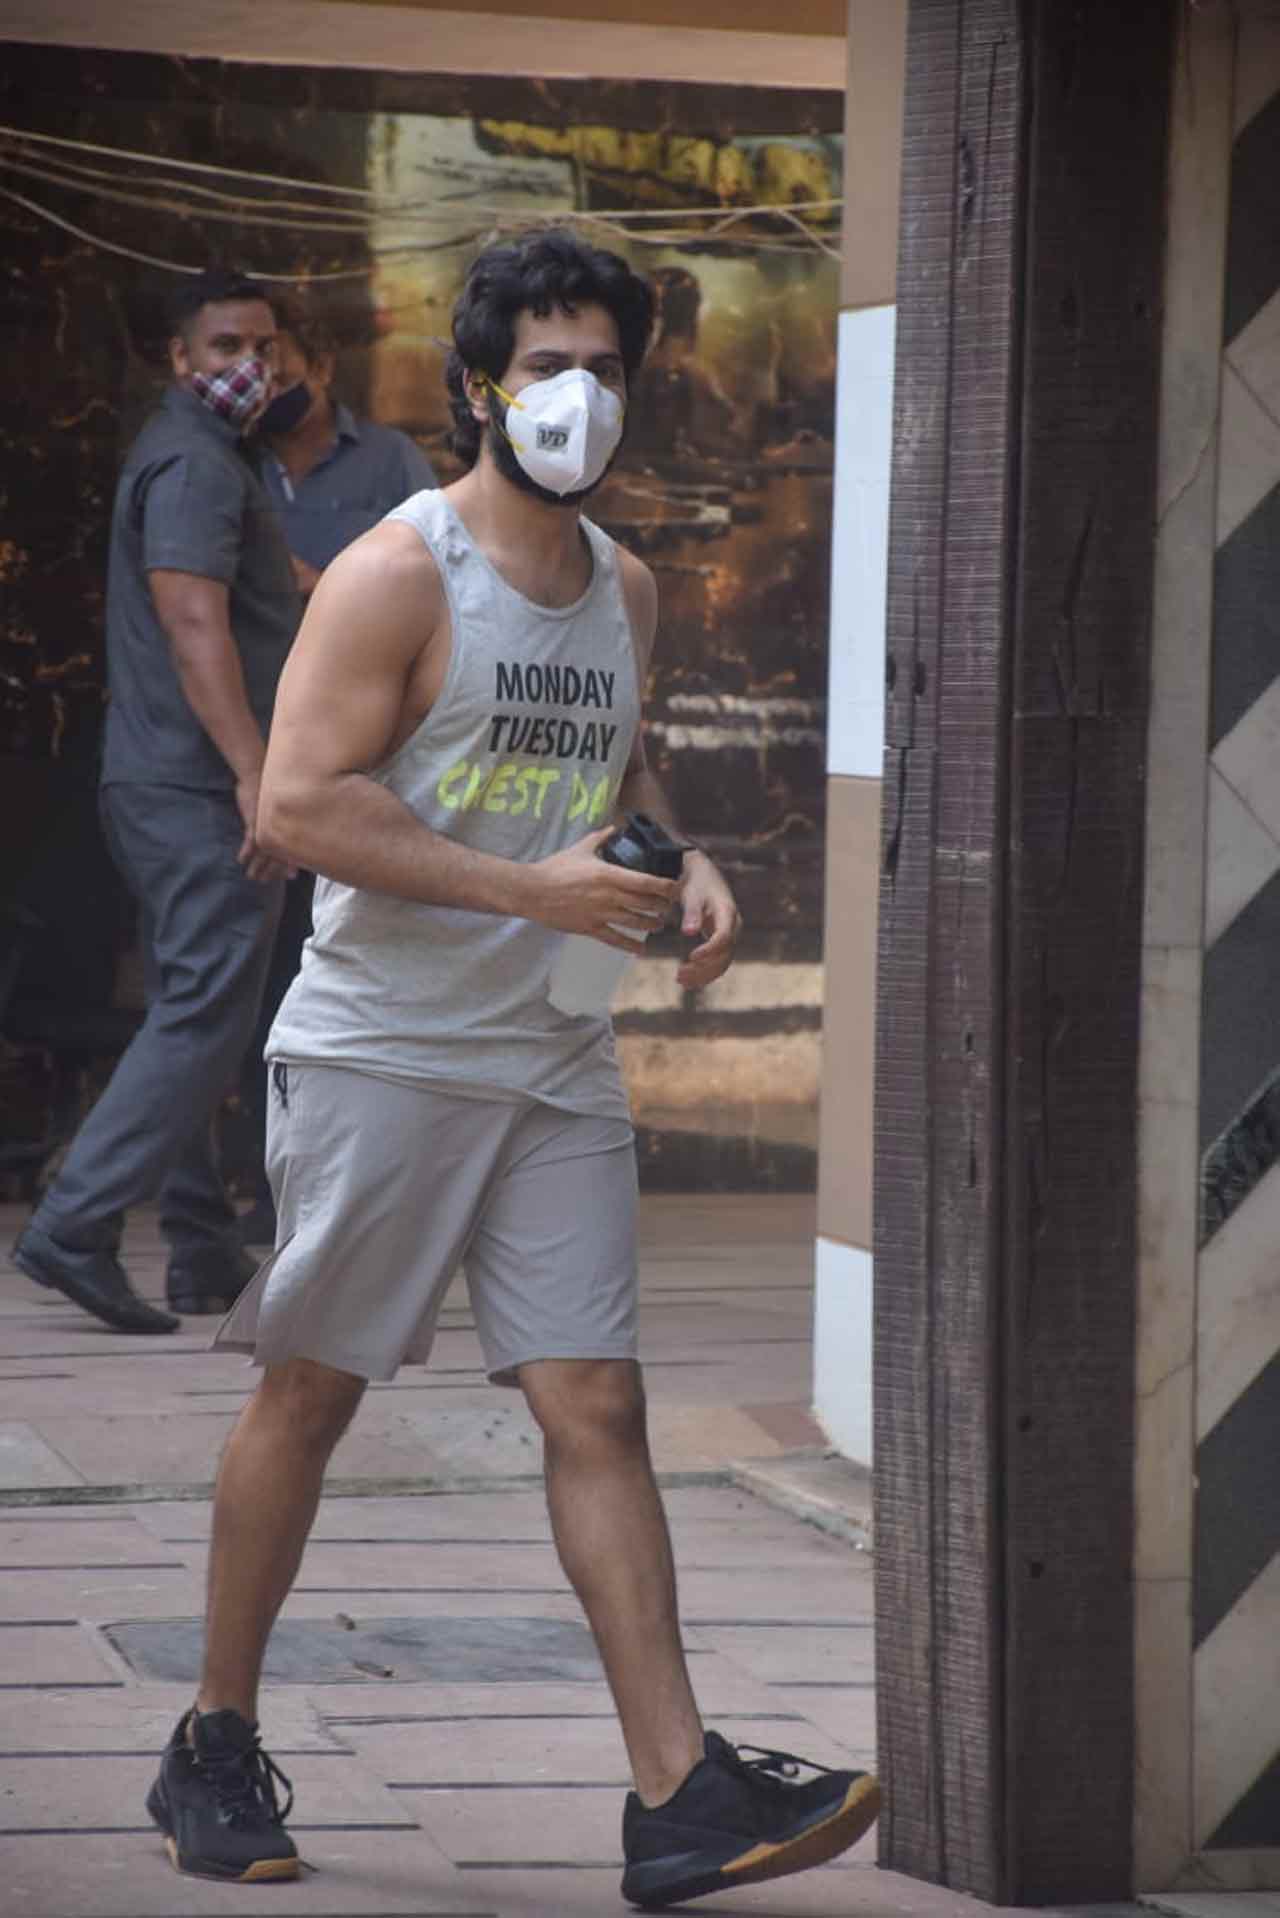 Varun Dhawan has kickstarted his workout journey once again ever since the gyms have been reopened after the unlock in Mumbai. Varun will be seen in the film 'Jug Jugg Jeeyo', also starring Anil Kapoor, Neetu Kapoor and Kiara Advani. He will also be seen in the supernatural thriller 'Bhediya'. Directed by Amar Kaushik and penned by Niren Bhatt, the film also stars Kriti Sanon and Deepak Dobriyal and is slated to hit the screens on April 14, 2022.